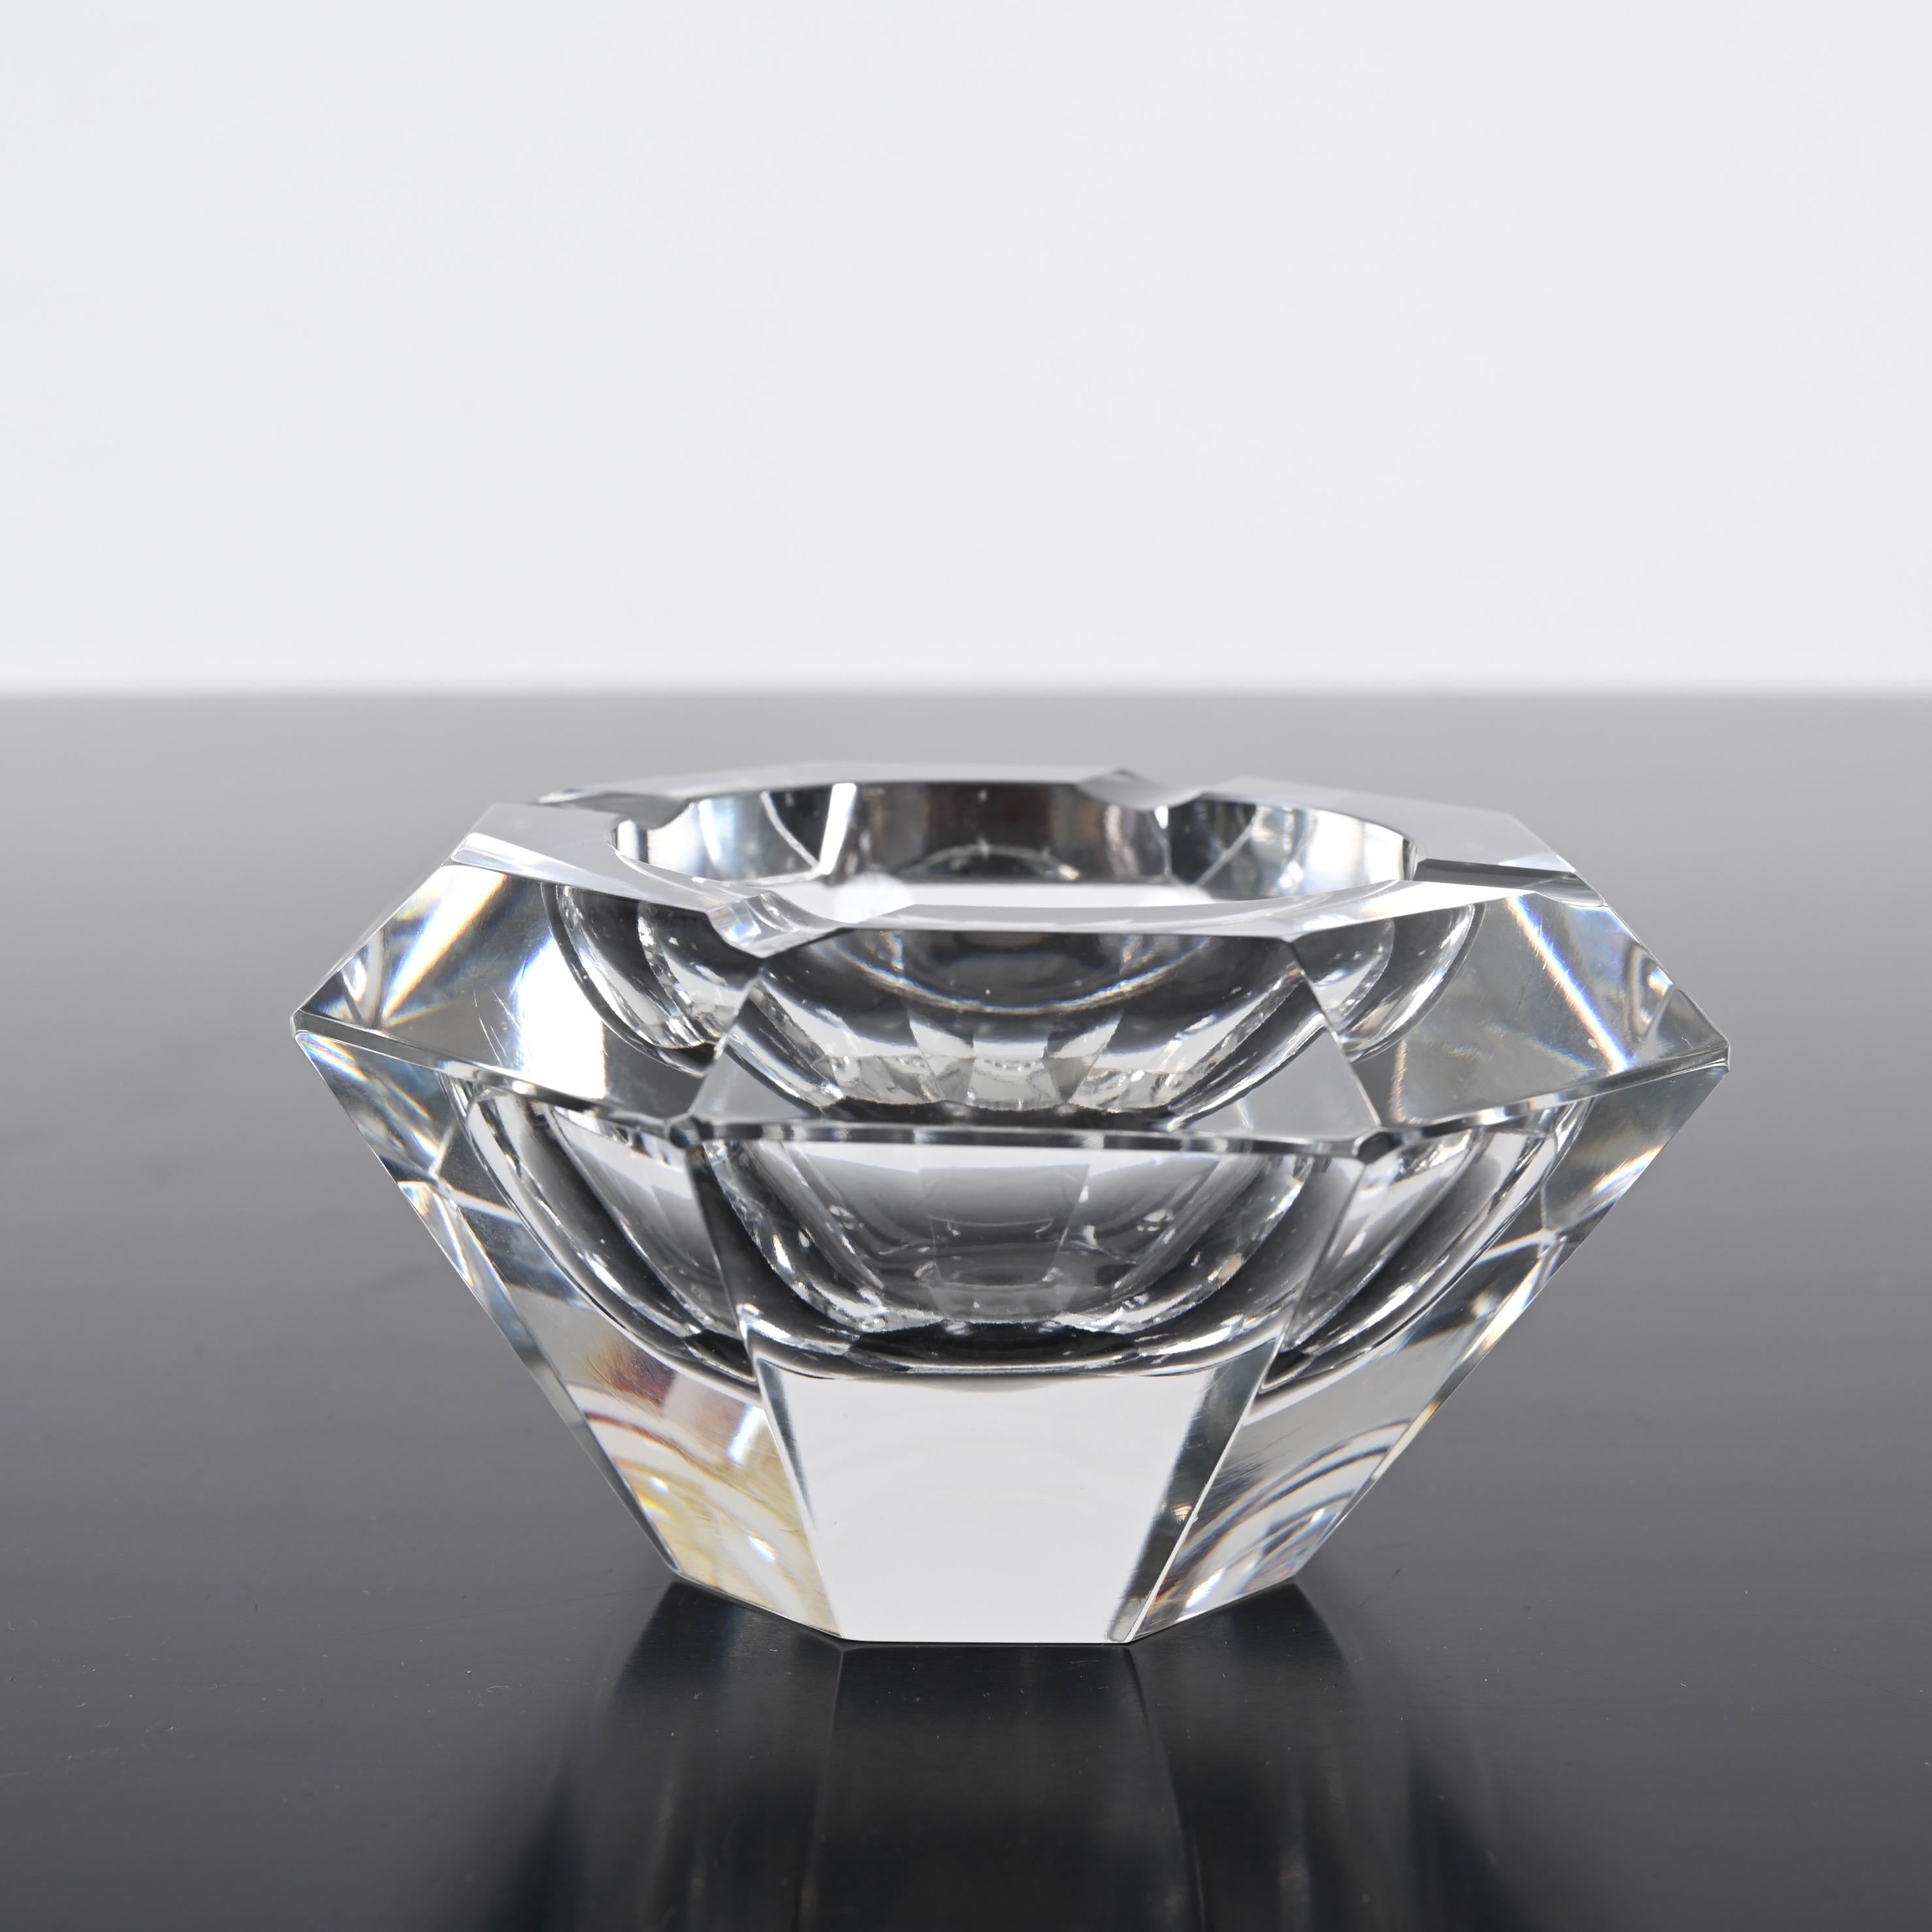 Giant Flavio Poli Bowl in Faceted Murano Glass in the Shape of a Diamond, Italy For Sale 4